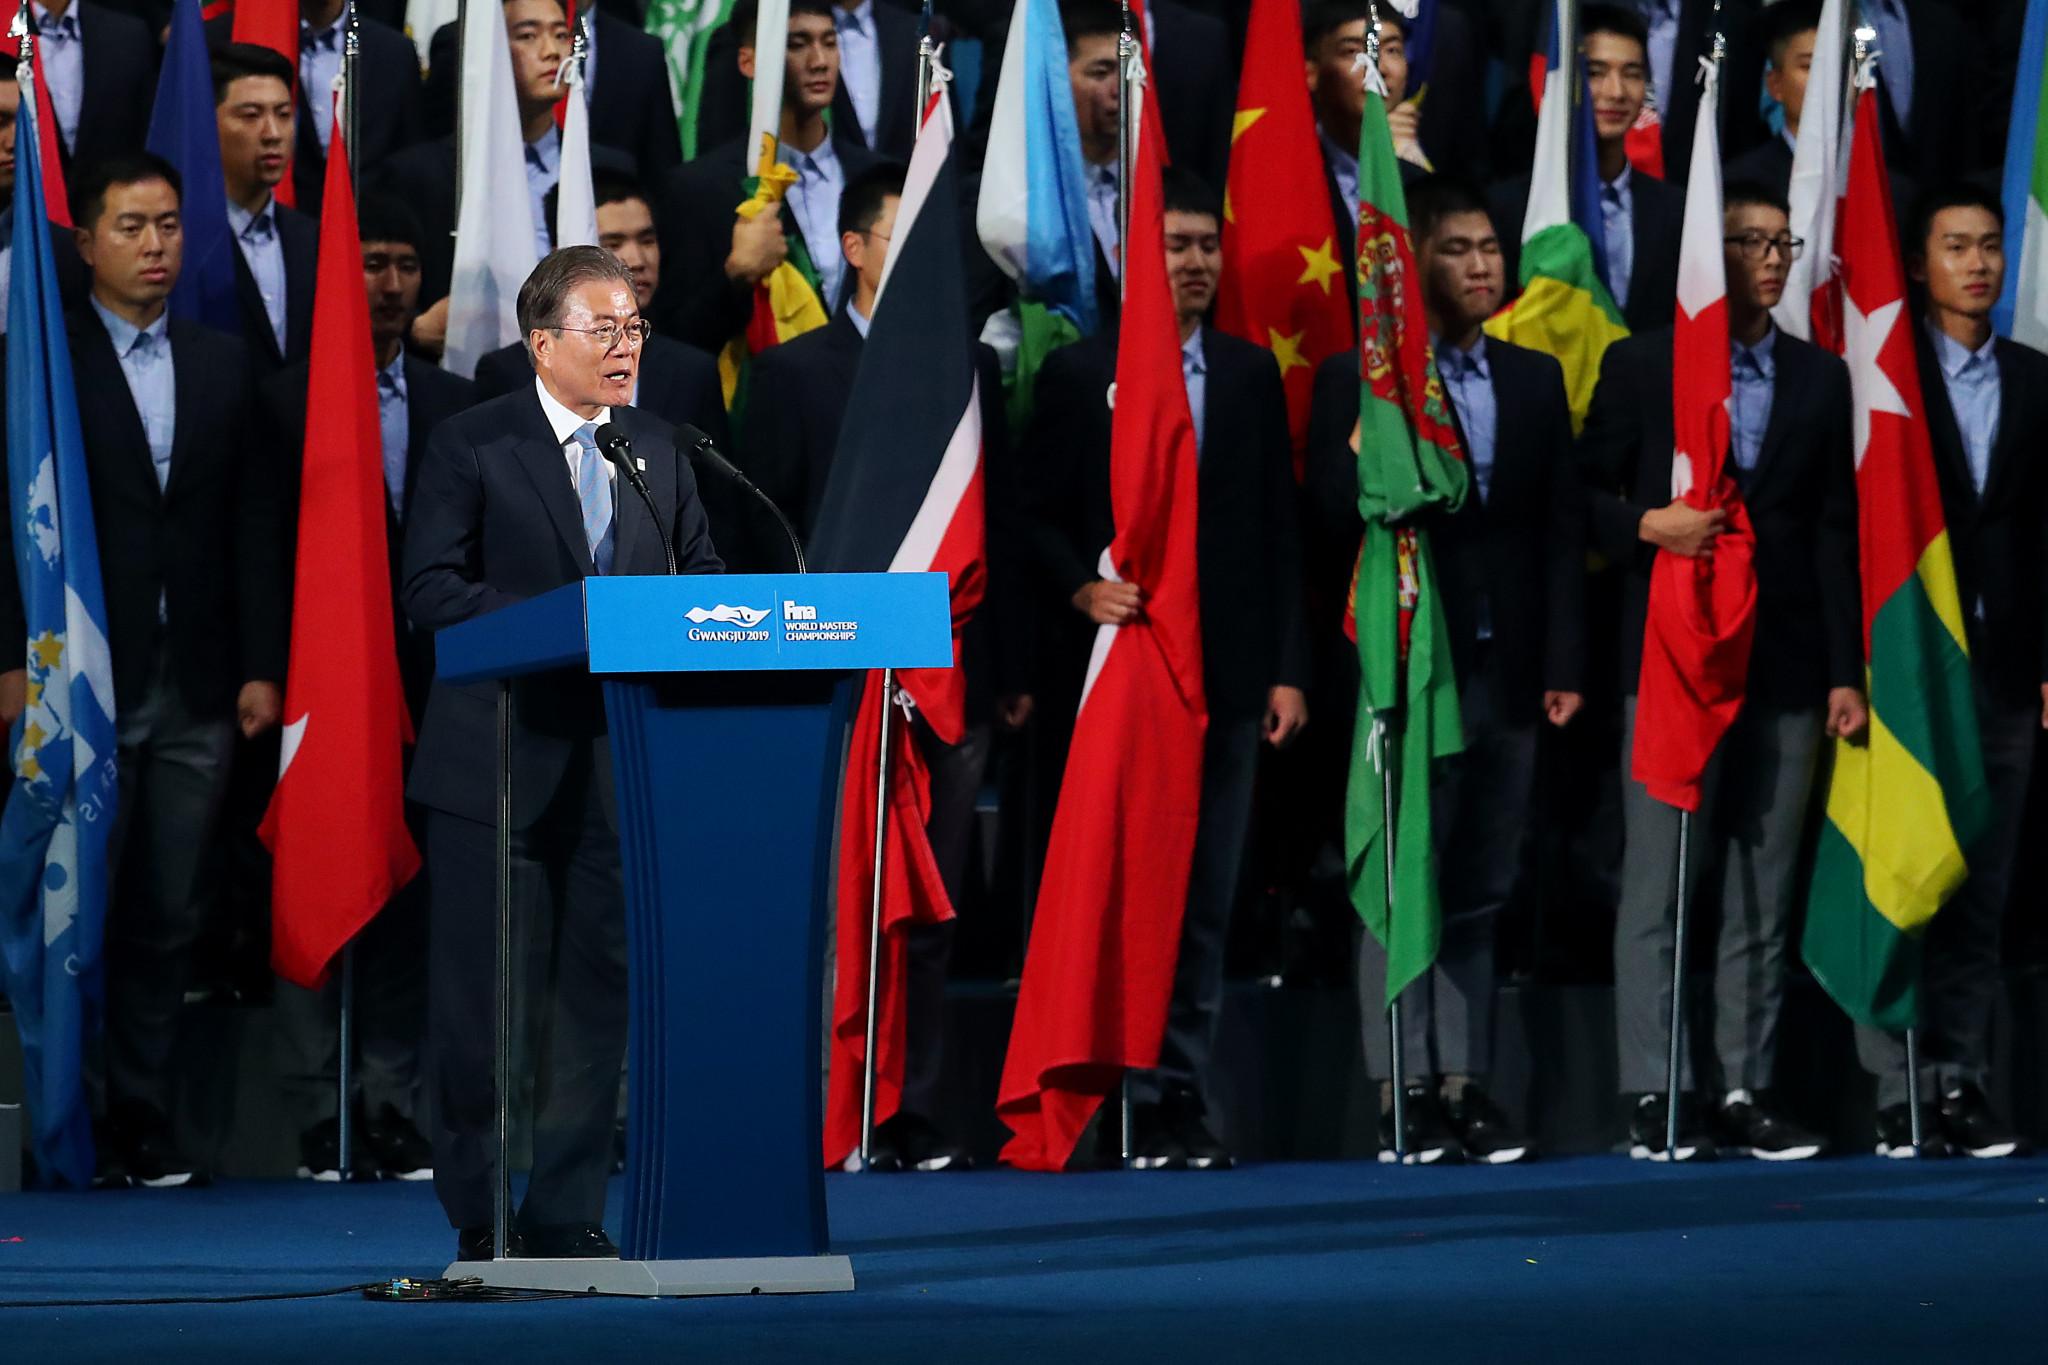 South Korean President Moon Jae-in officially opened the 2019 World Aquatics Championships ©Getty Images